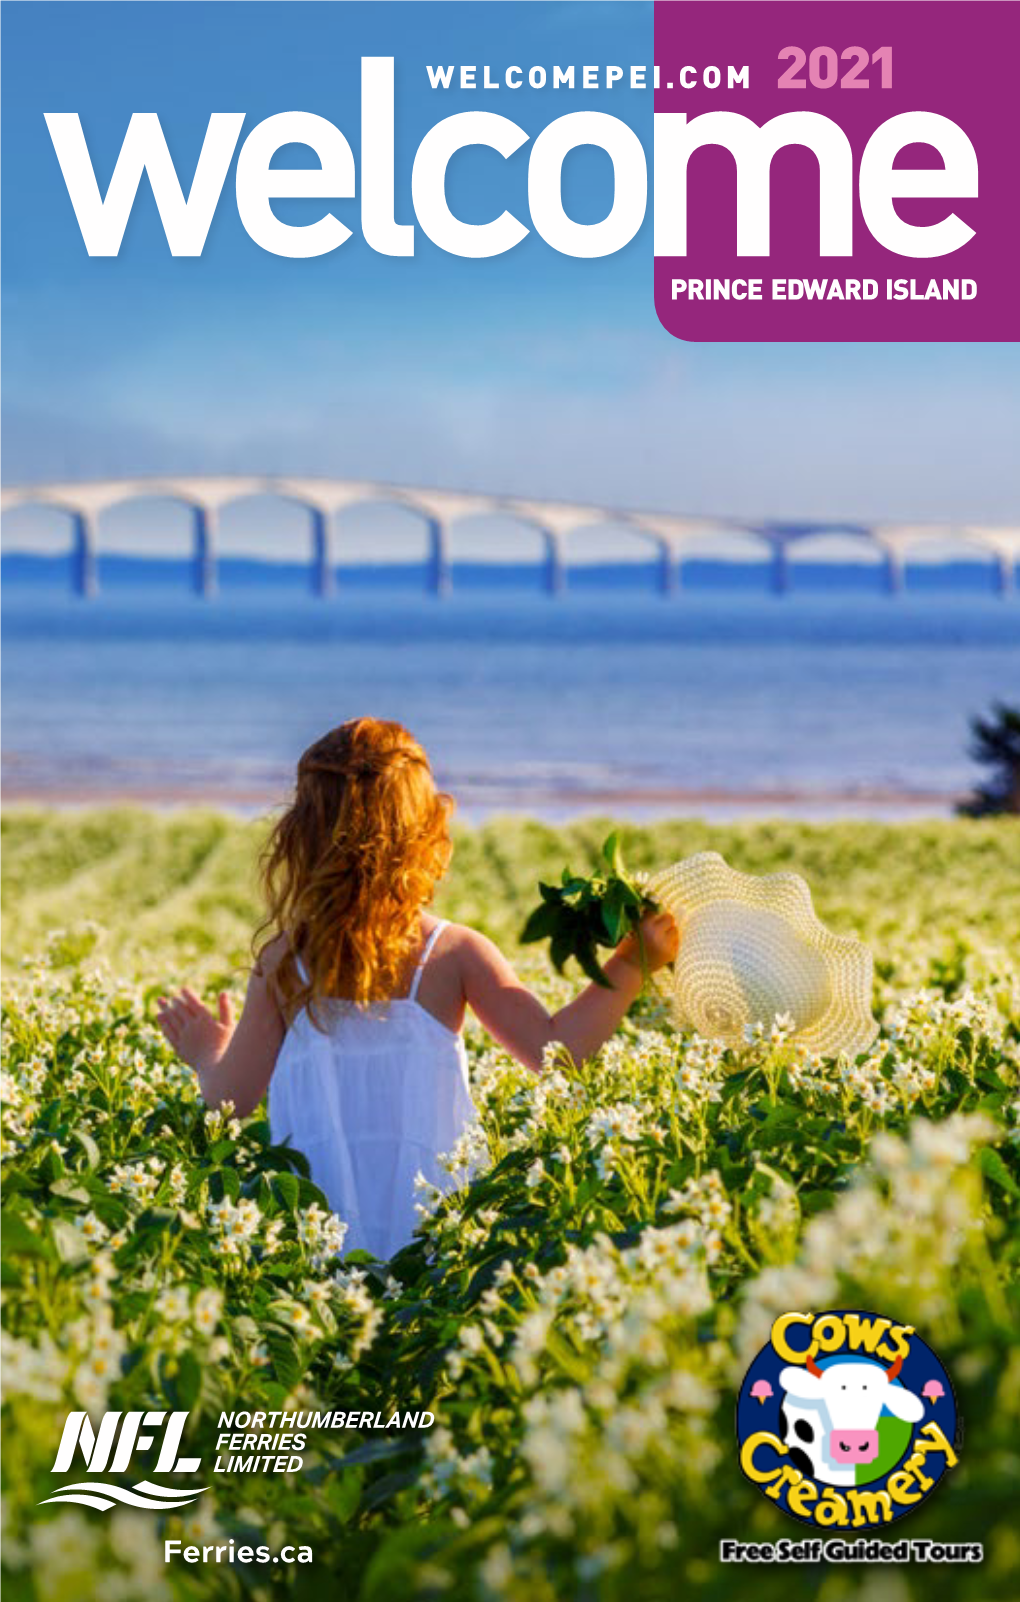 Welcome PEI Travel Guide